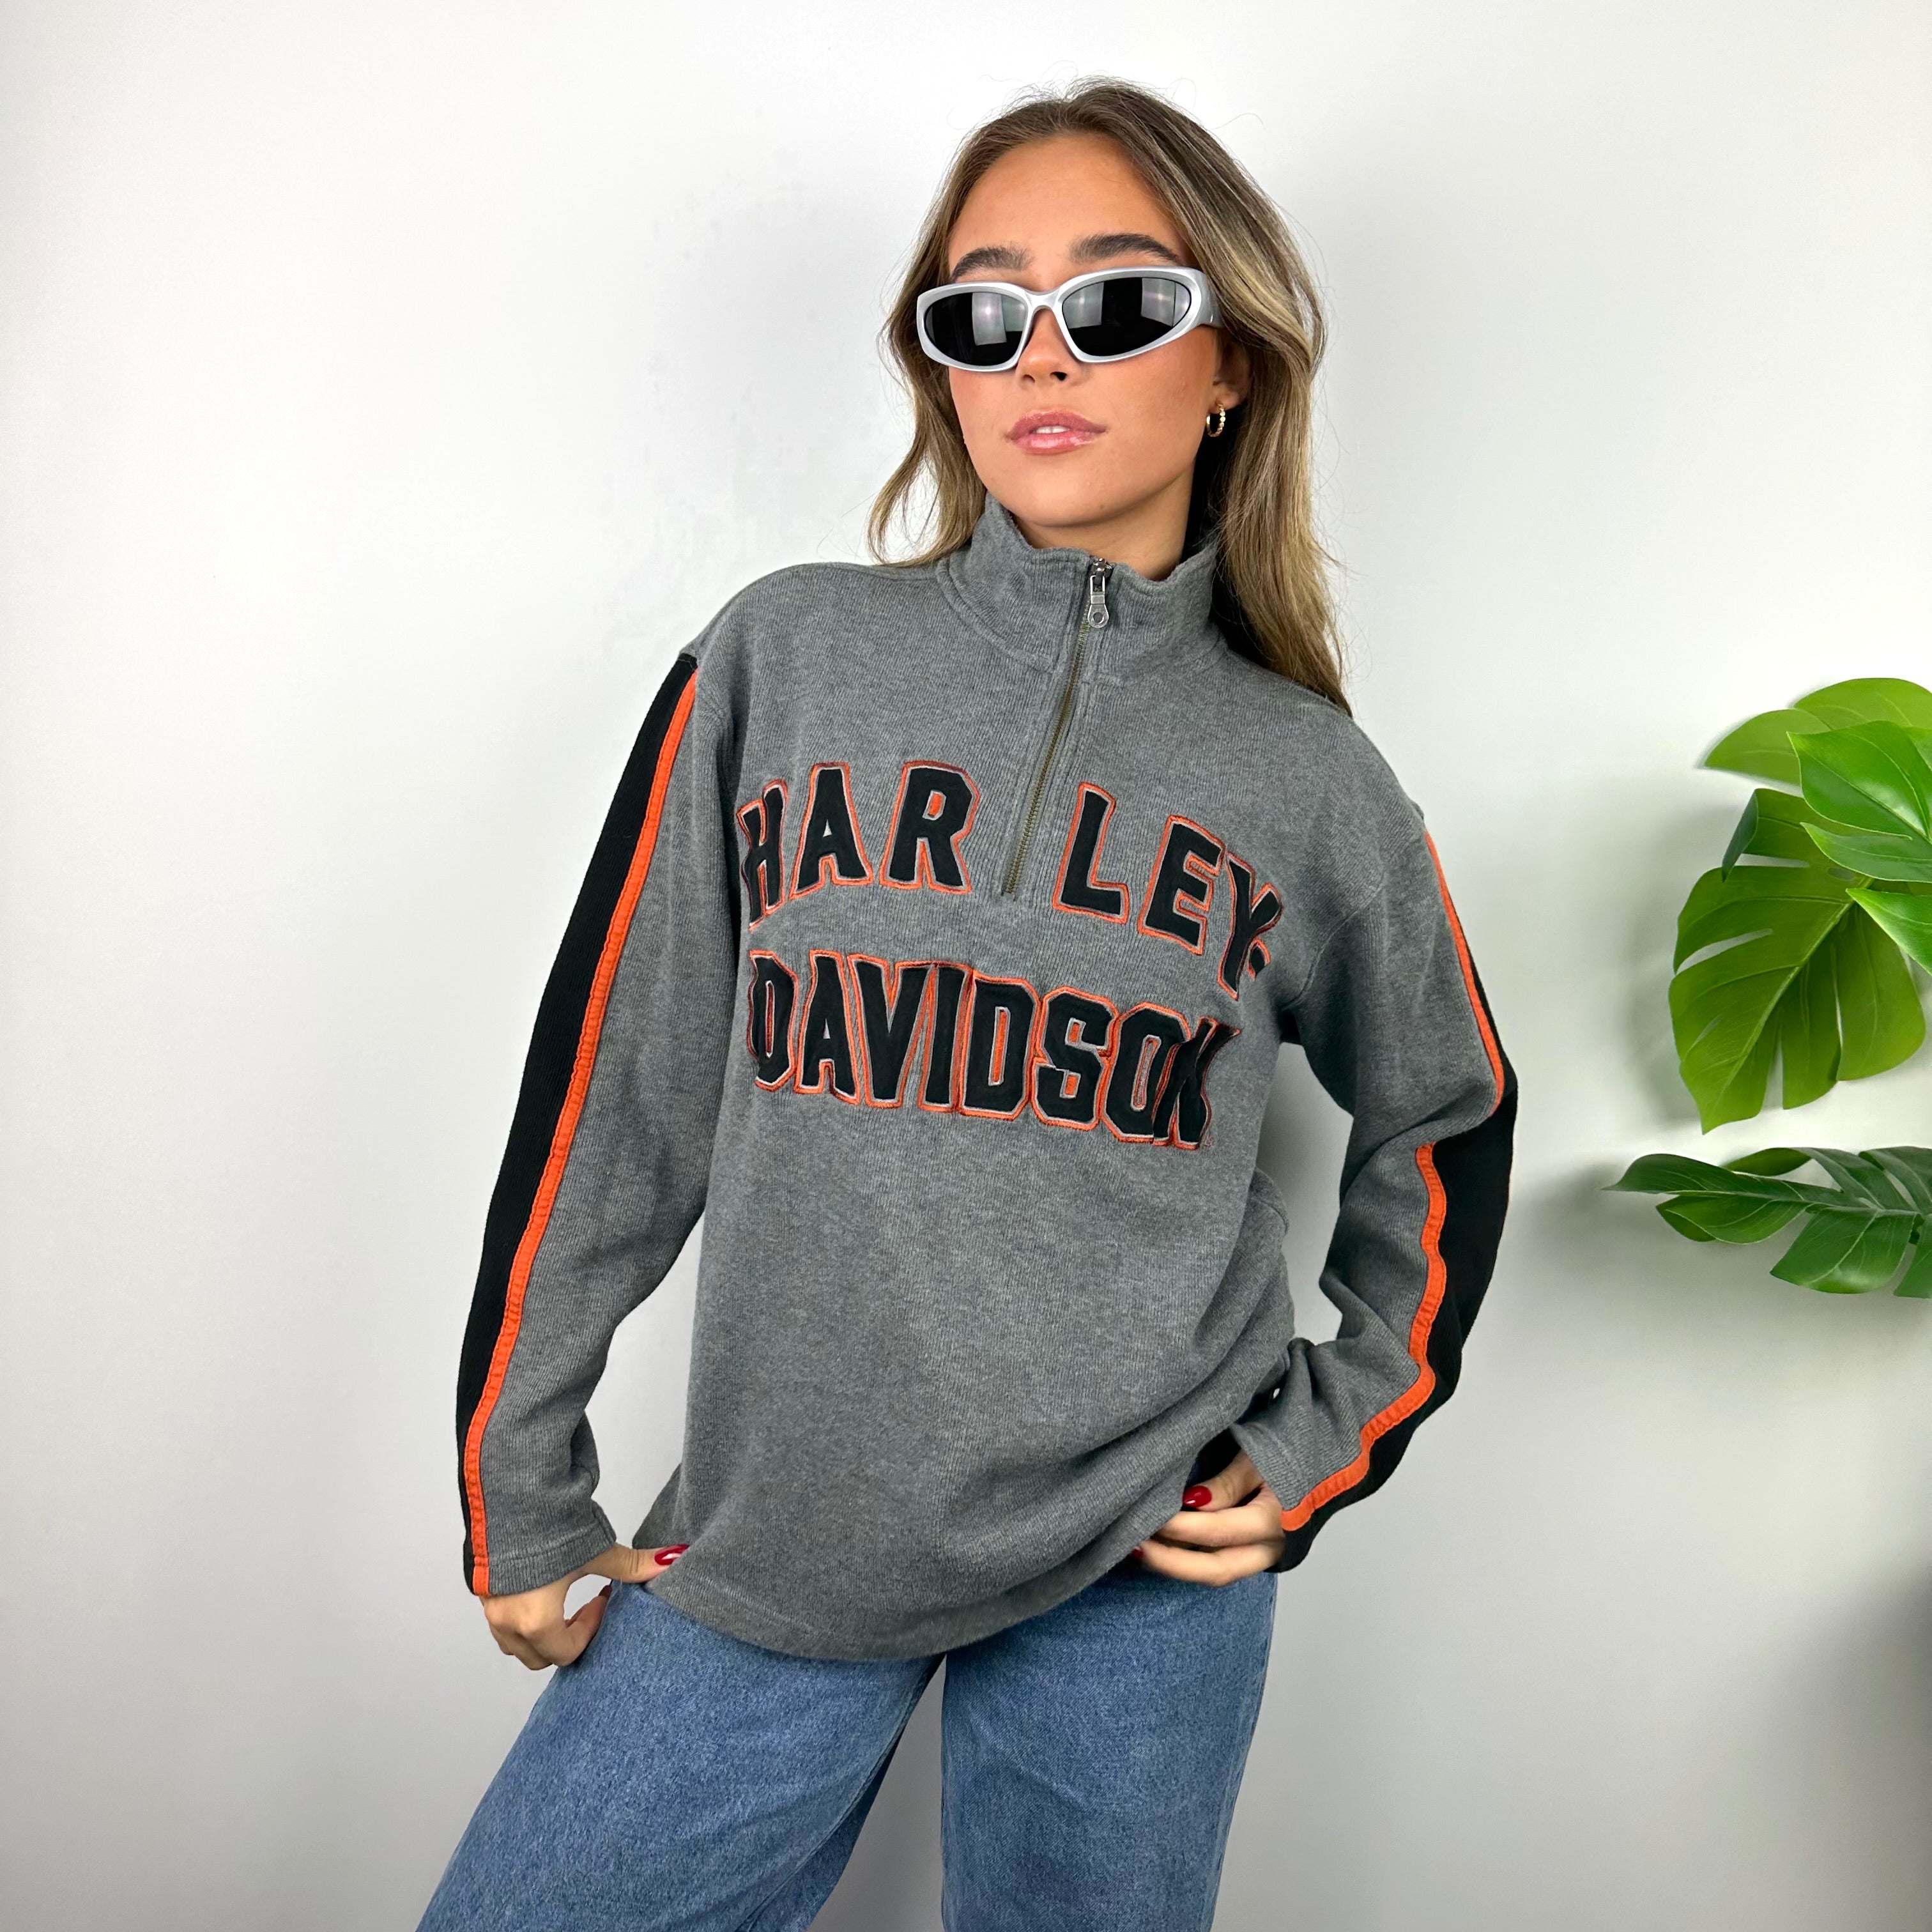 Harley Davidson Grey Embroidered Spell Out Quarter Zip Sweatshirt (S)